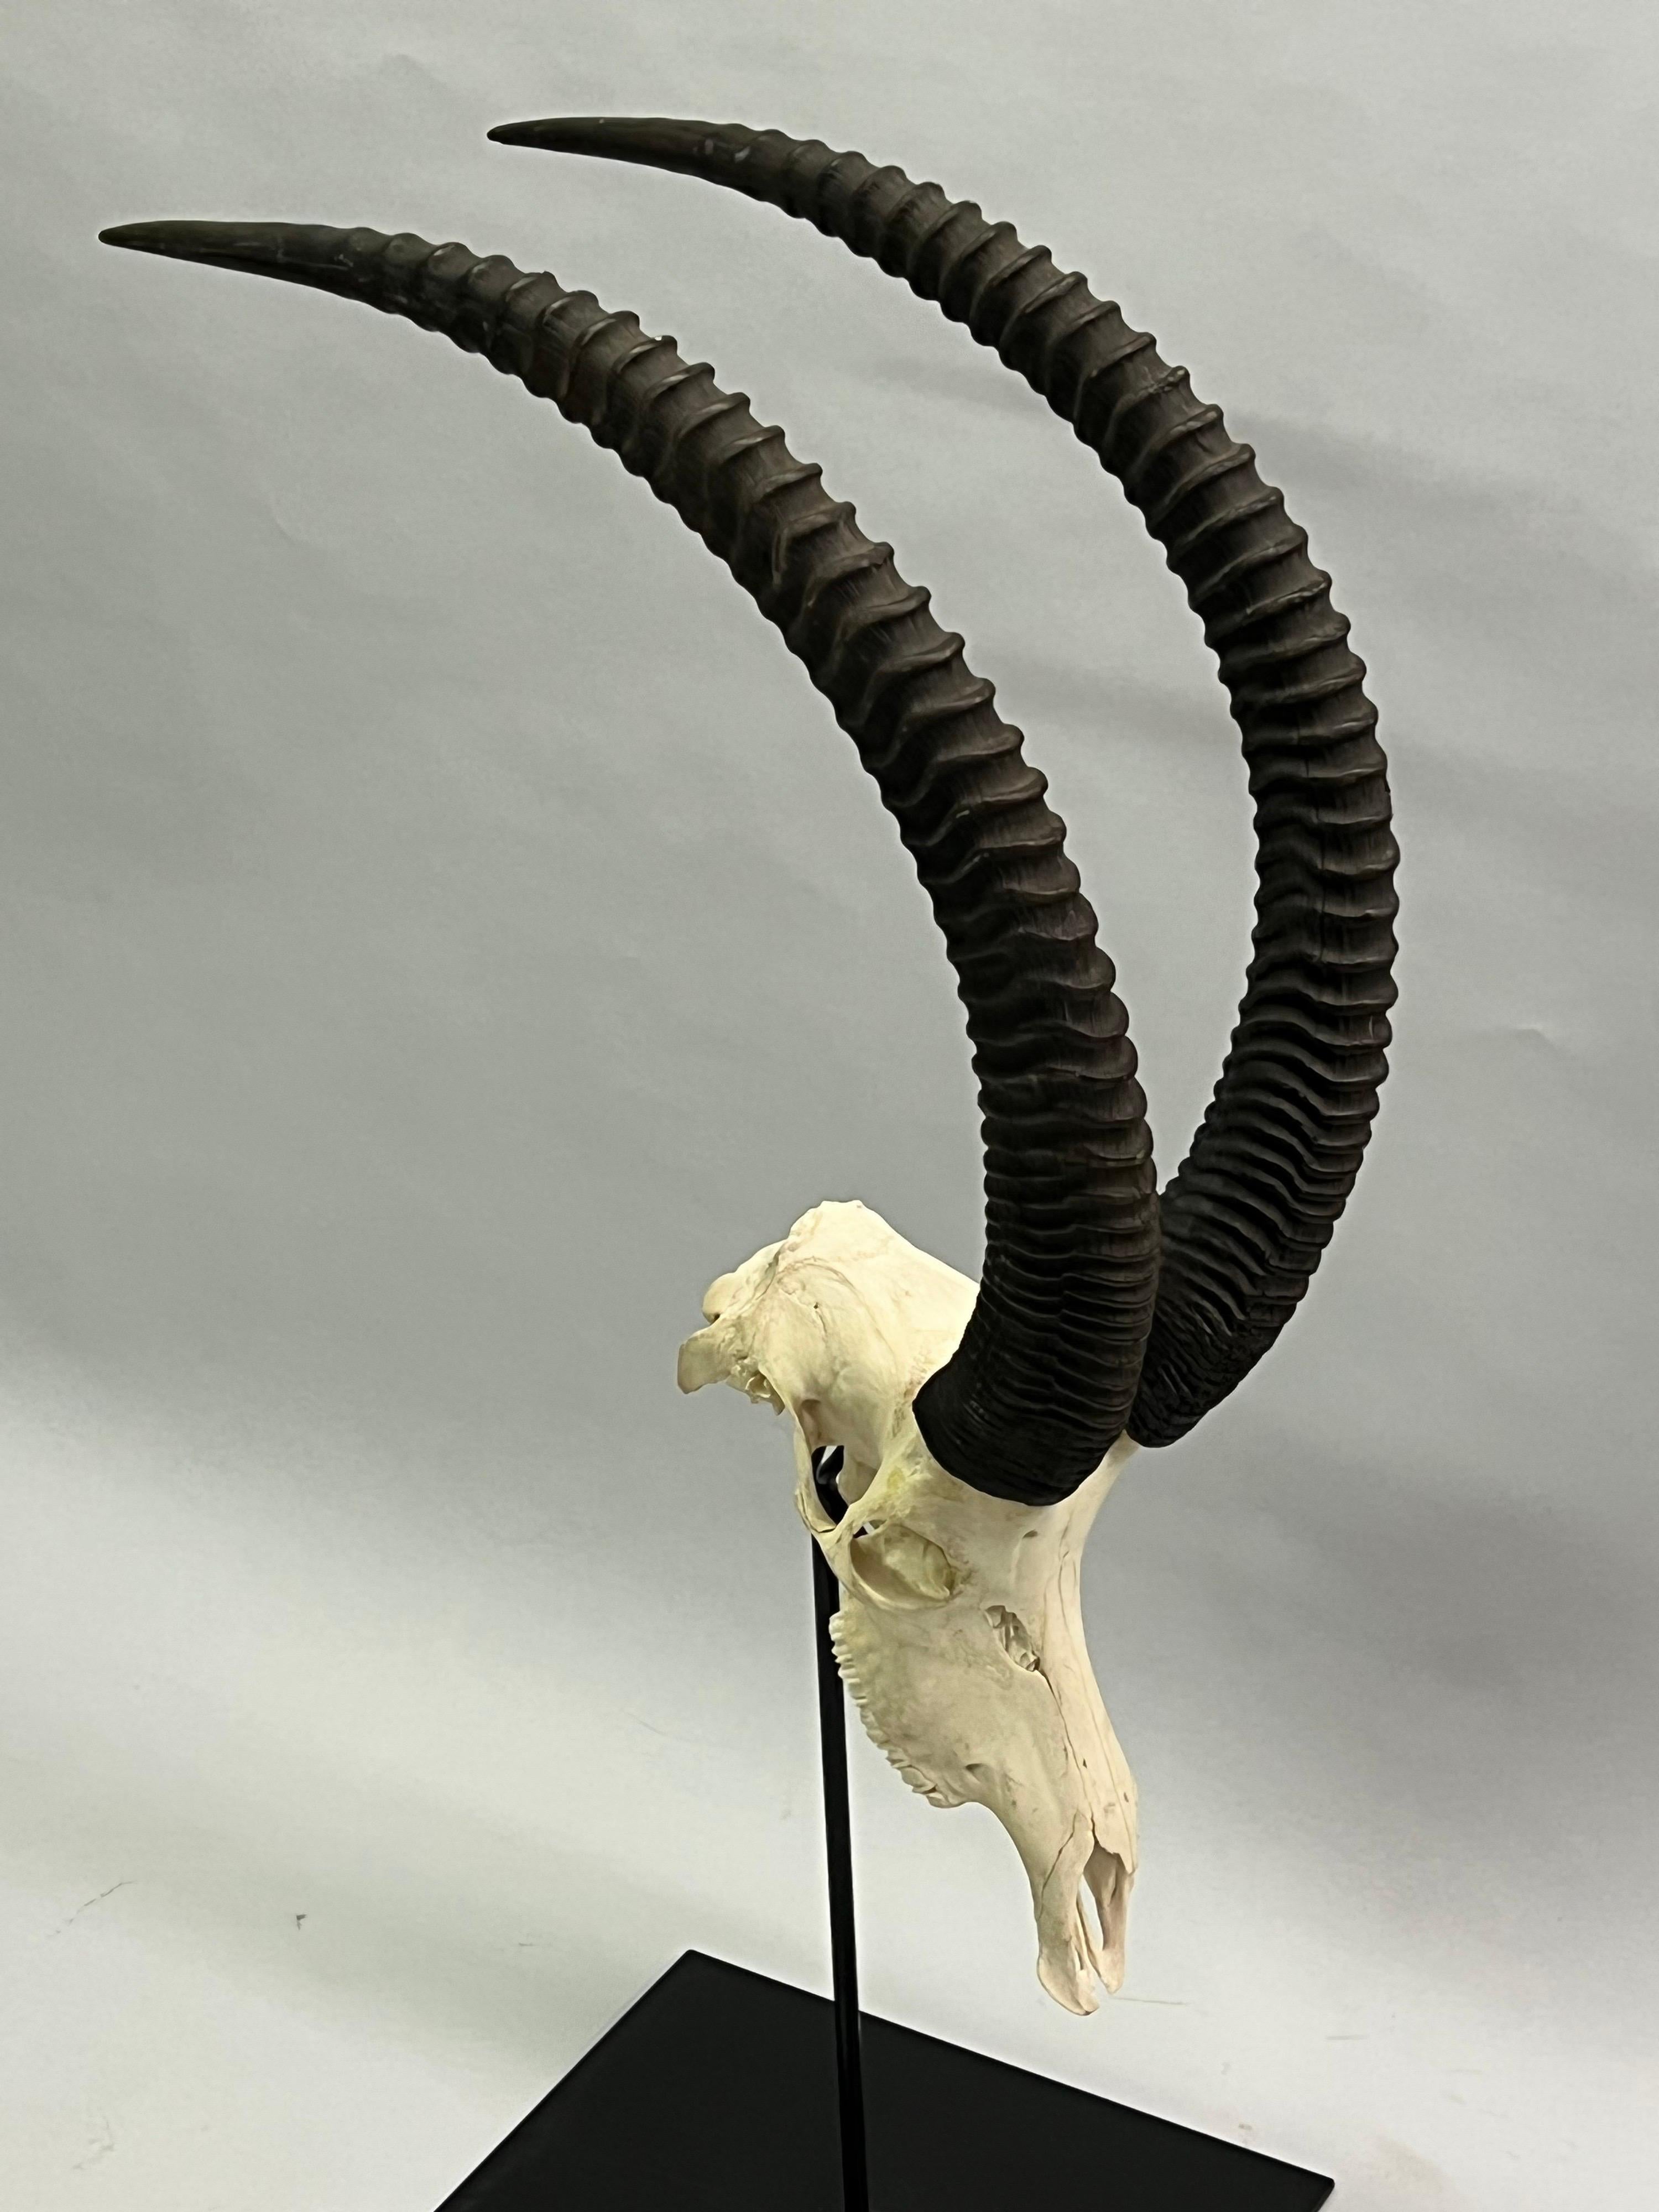 A magnificent, stunning African sable antelope with large curved ringed horns or antlers mounted on a wrought iron stand. The piece is mounted as a sculpture and conveys the presence, power, balance and harmony of these incredible animals. It's